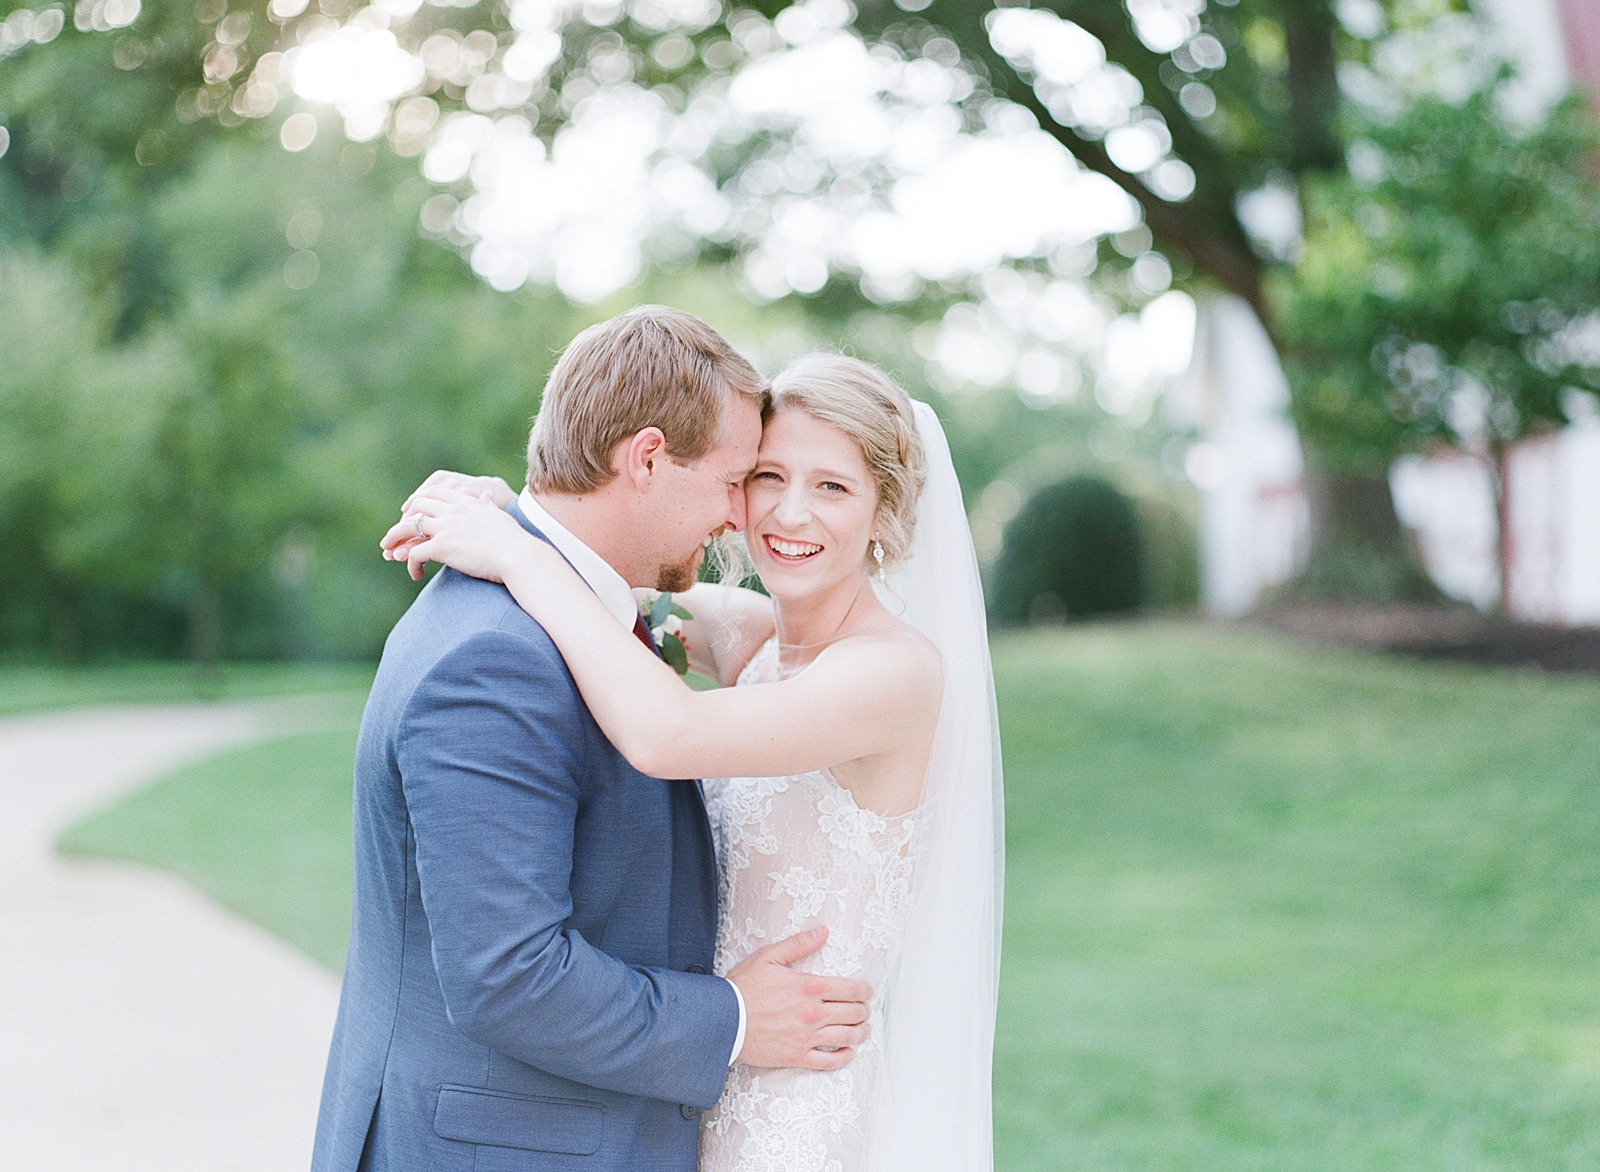 7 Reasons Why We Still Shoot Film Bride and Groom Snuggling Photo